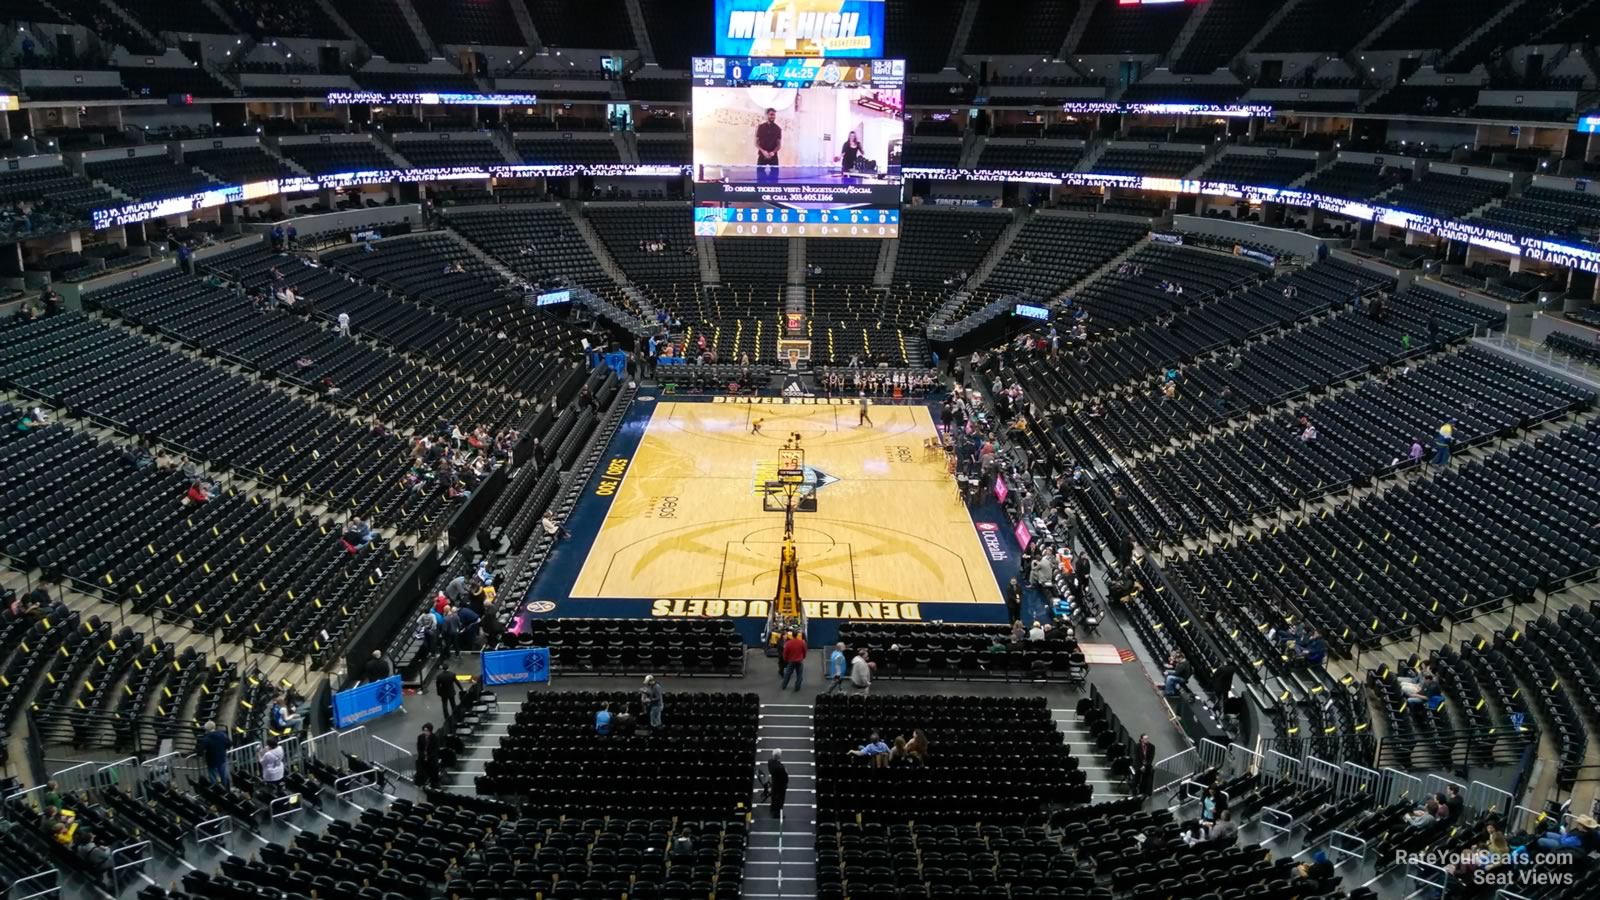 section 321, row 1 seat view  for basketball - ball arena